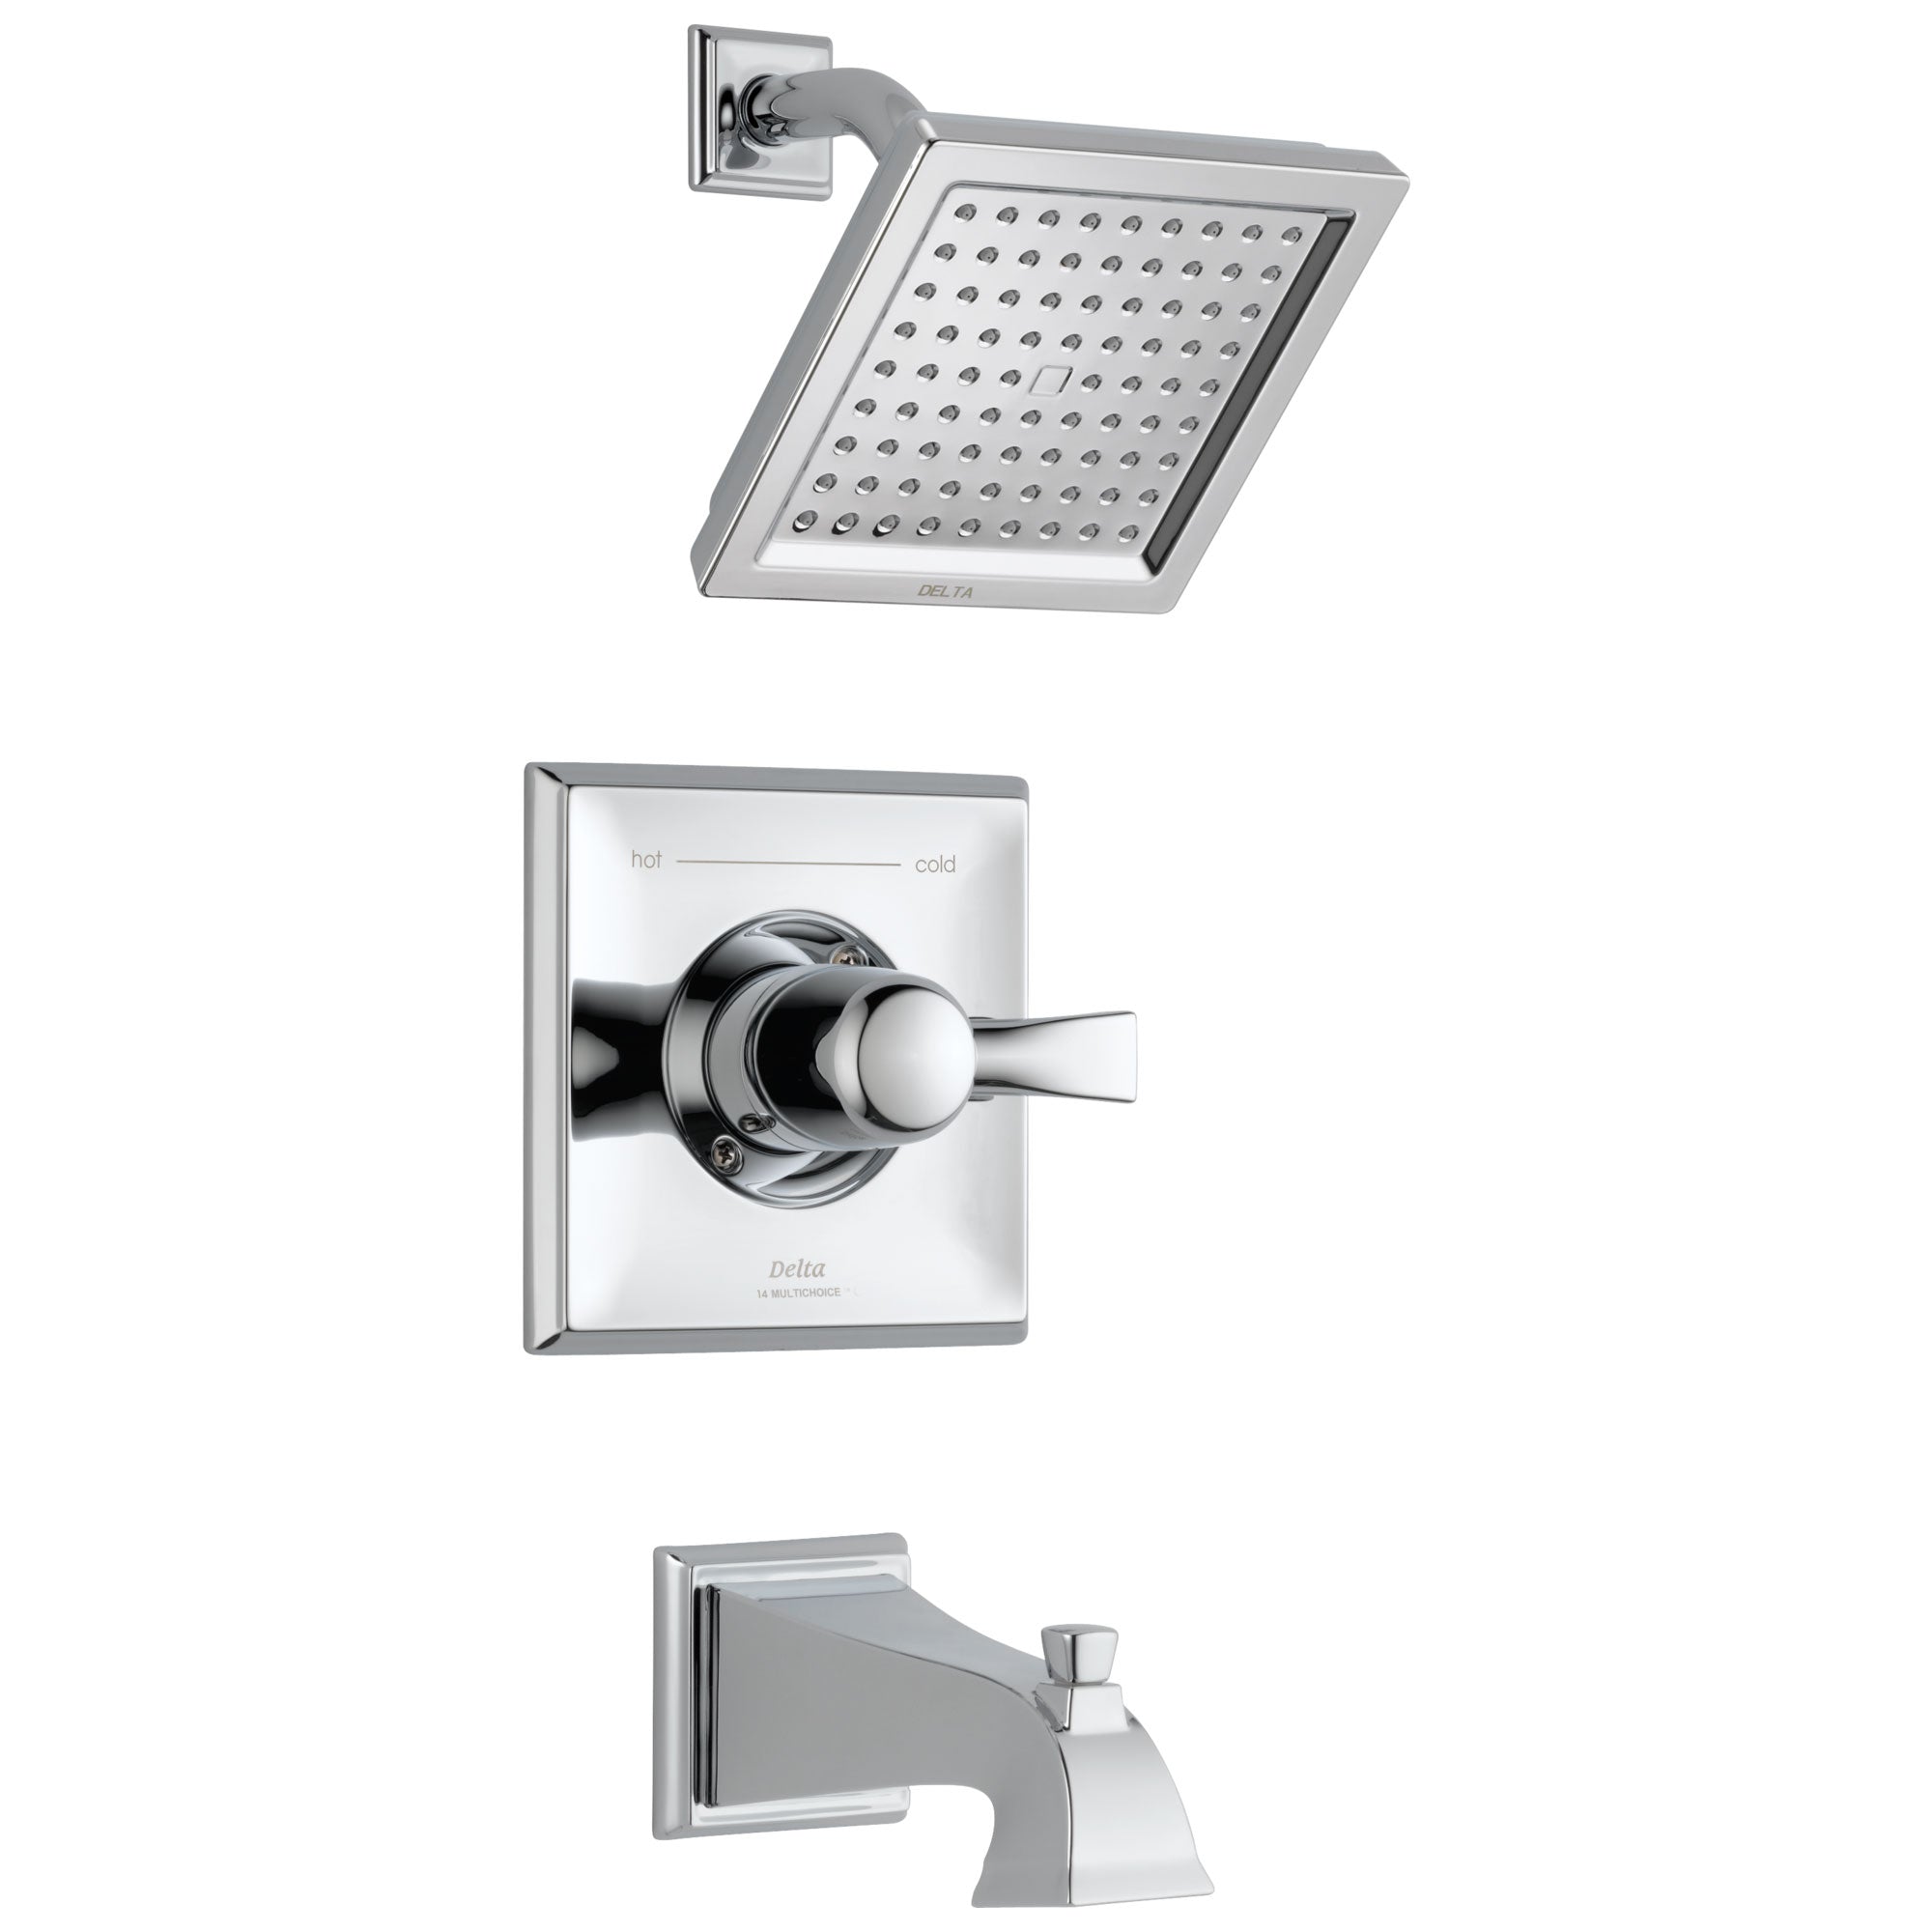 Delta Dryden Collection Chrome Finish Monitor 14 Series Water Efficient 1.75 GPM Tub and Shower Faucet Trim Kit Includes Rough-in Valve with Stops D2408V